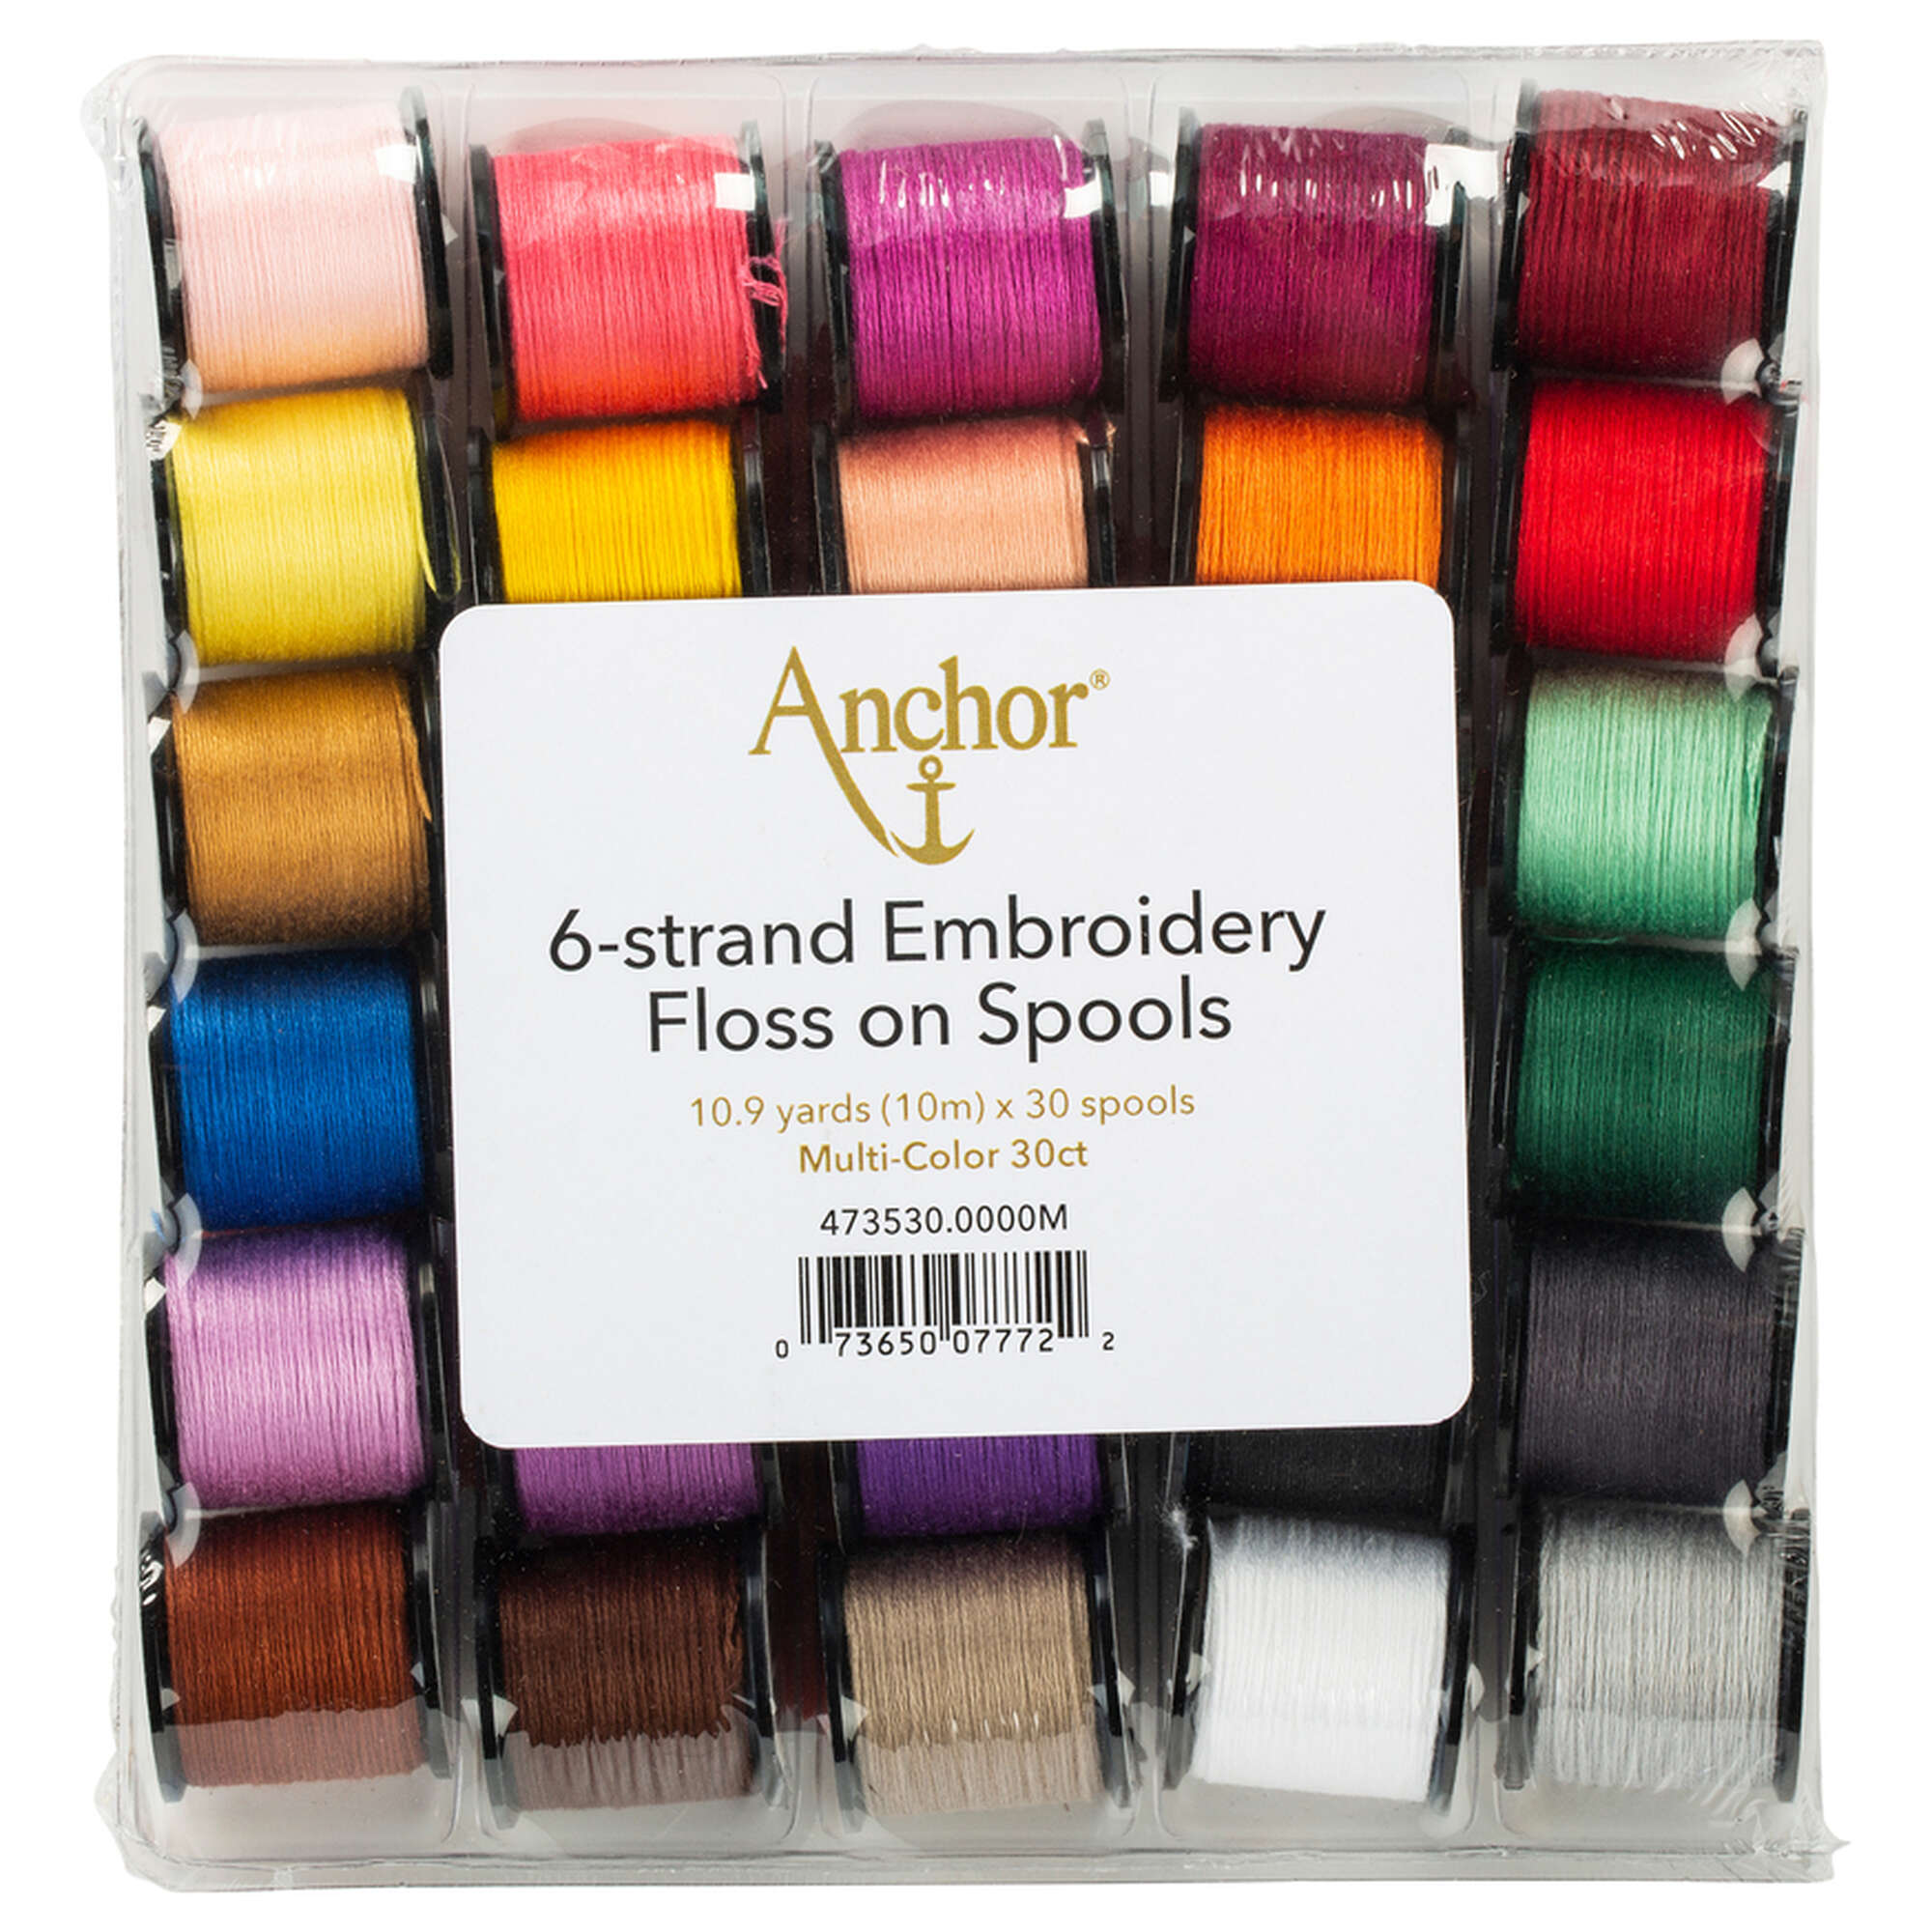 Embroidery threads and floss - all you need to know